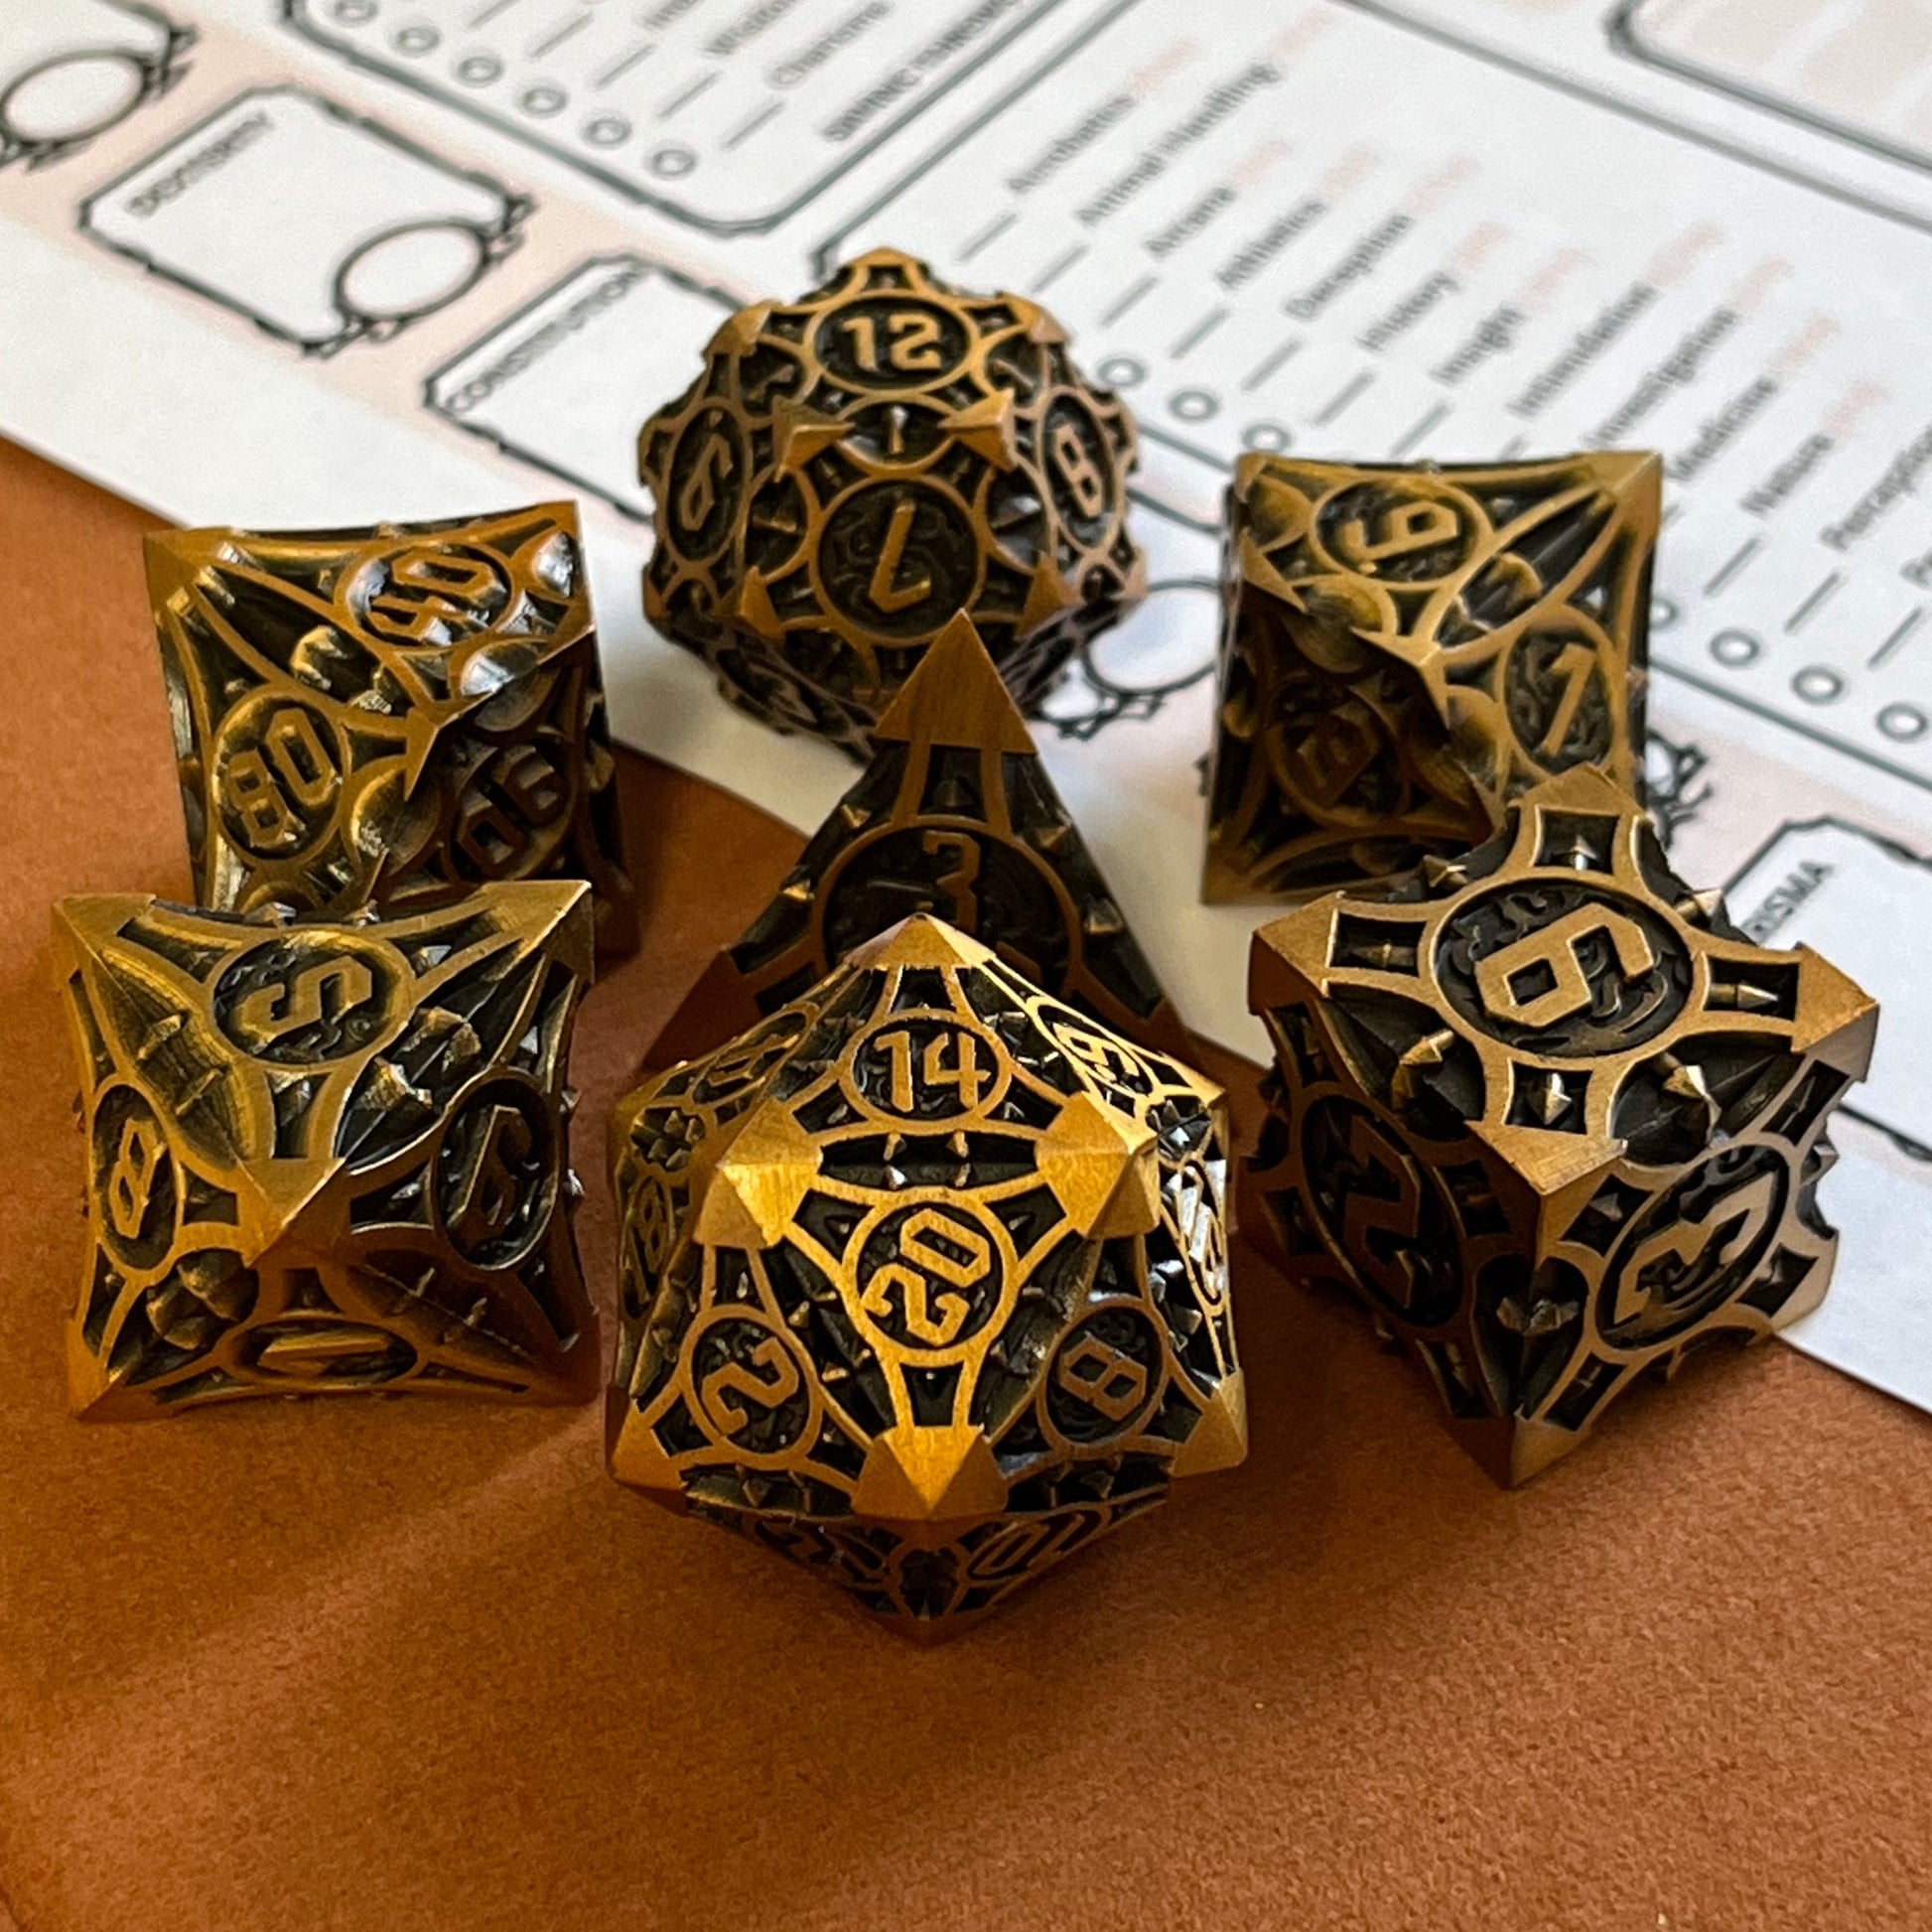 Metal DnD dice sets, TTRPG, role-playing games, DnD dice, polyhedral dice, shiny math rocks